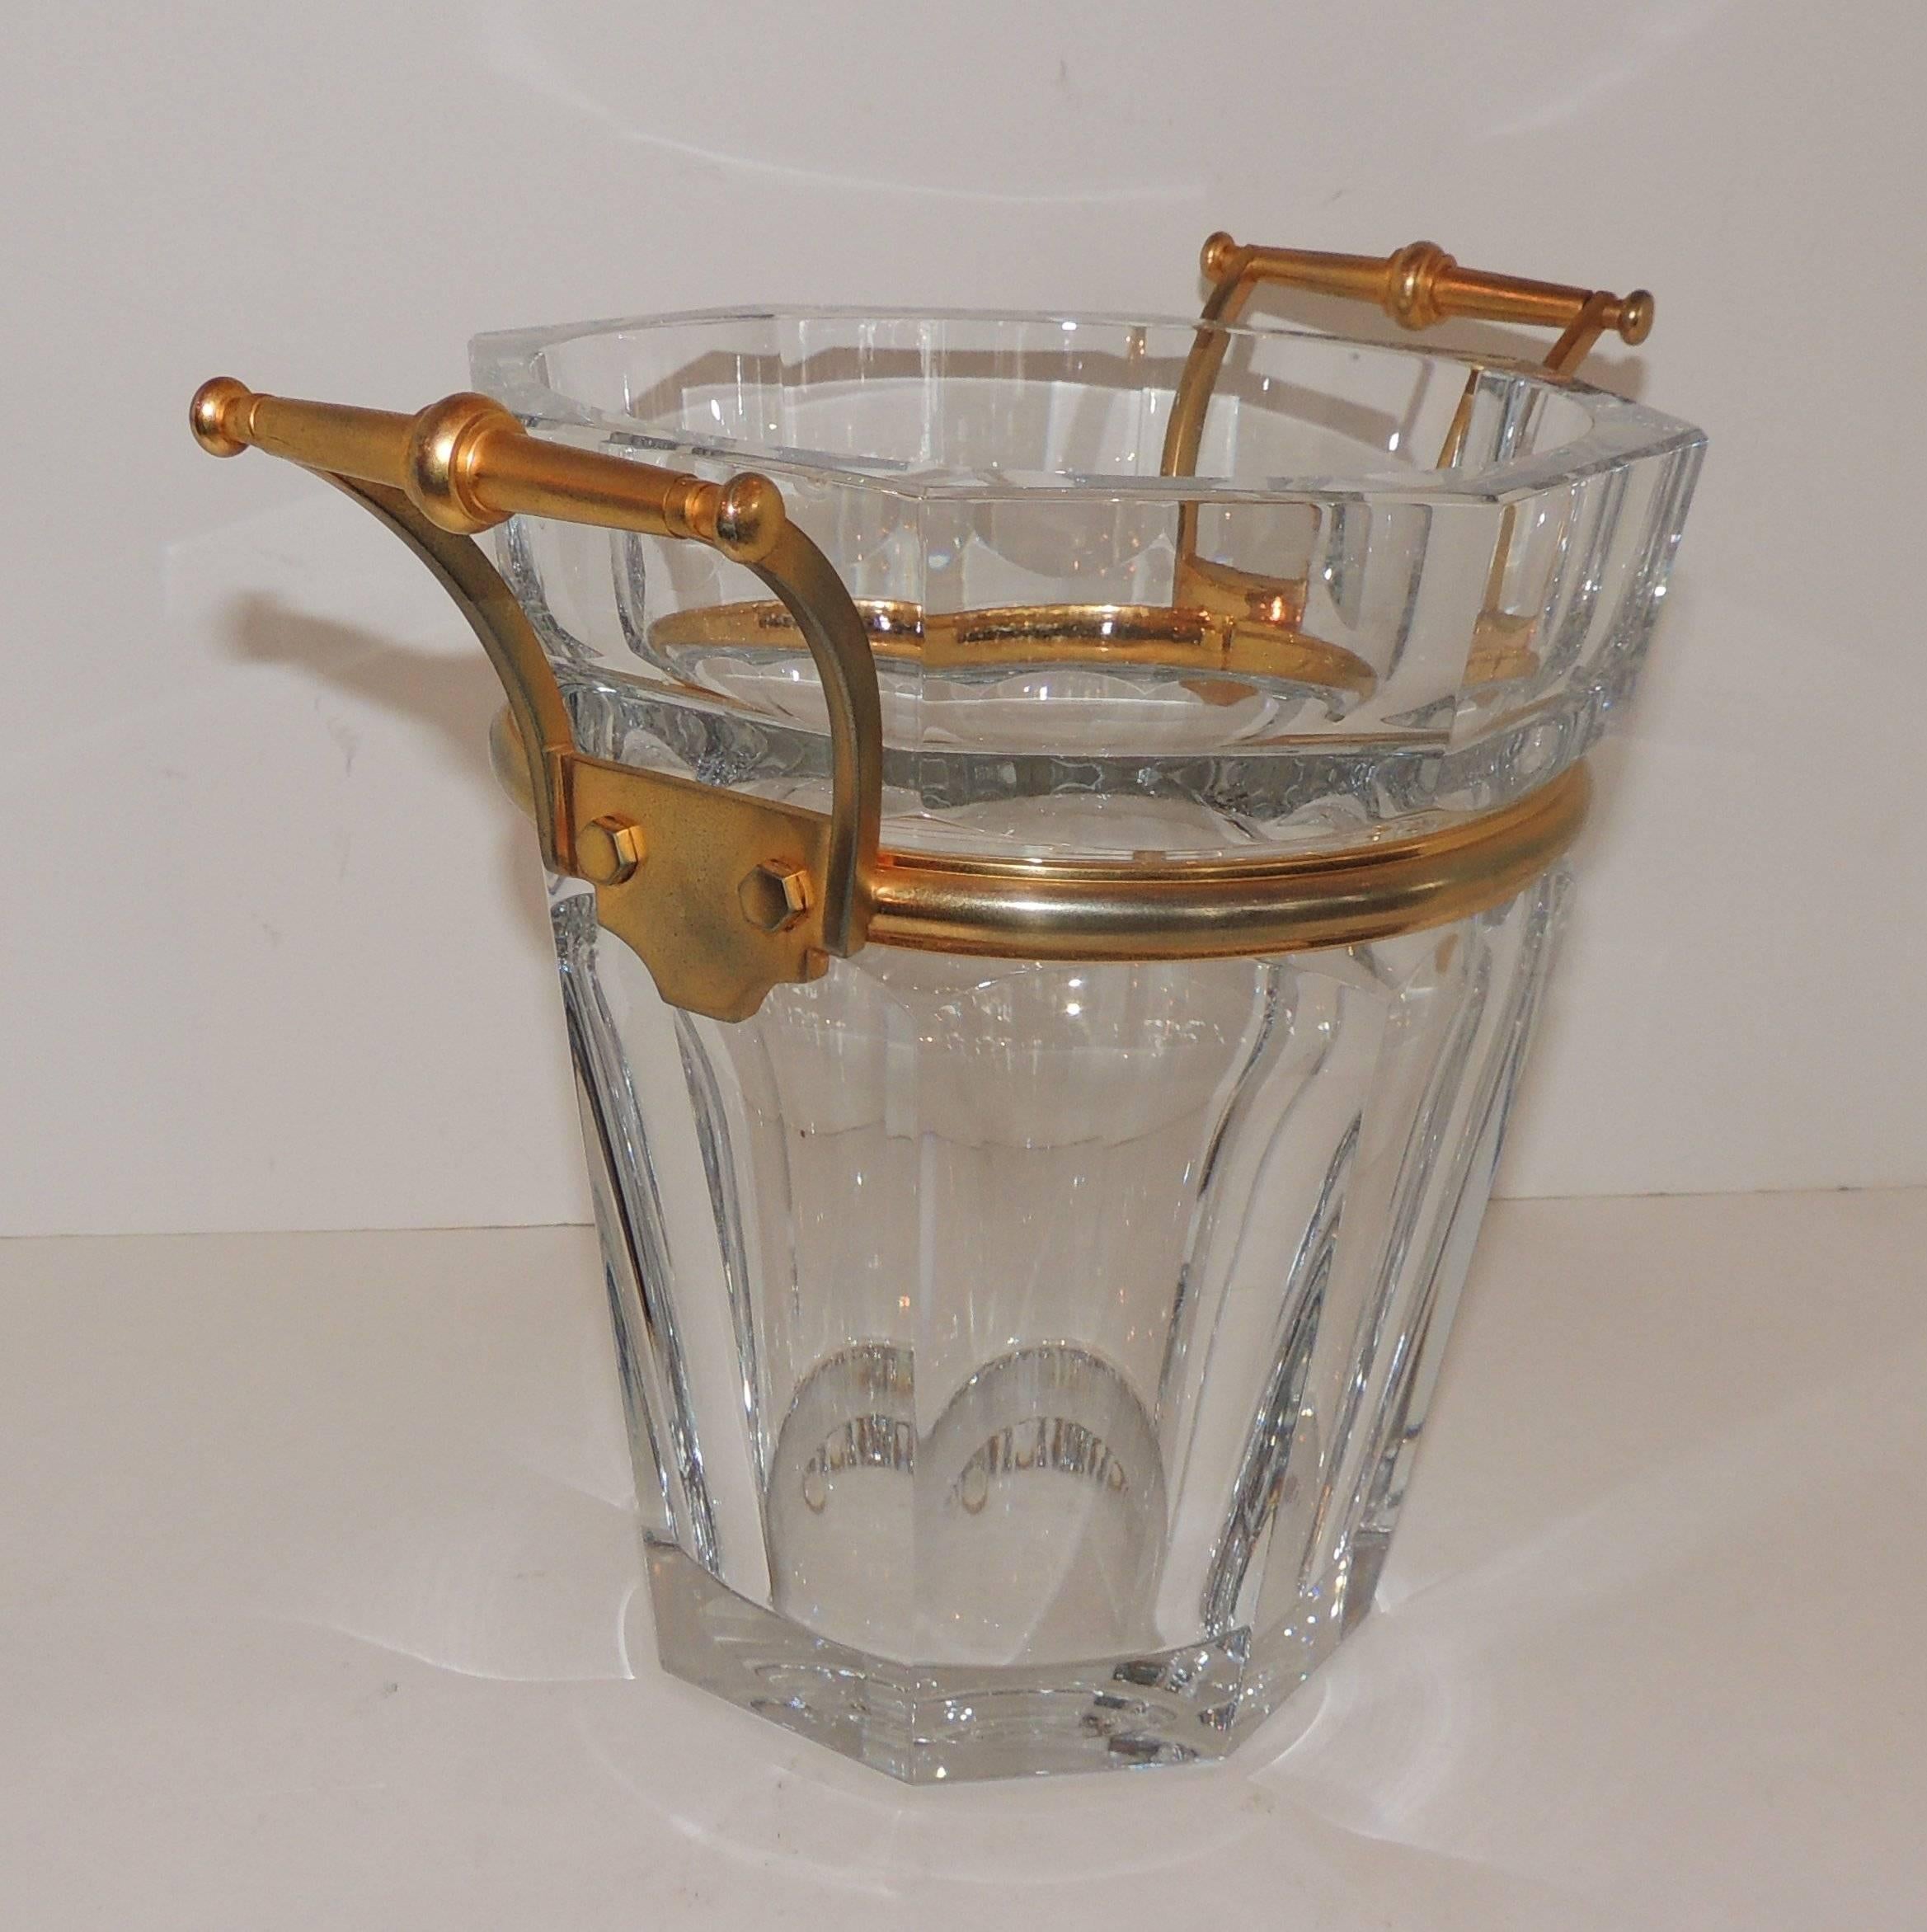 Wonderful crystal champagne or ice bucket signed Baccarat and marked with etch on bottom. Gilt bronze band and two handles surround the top have wear.
Minor flee bite to rim from use

Measures: 9